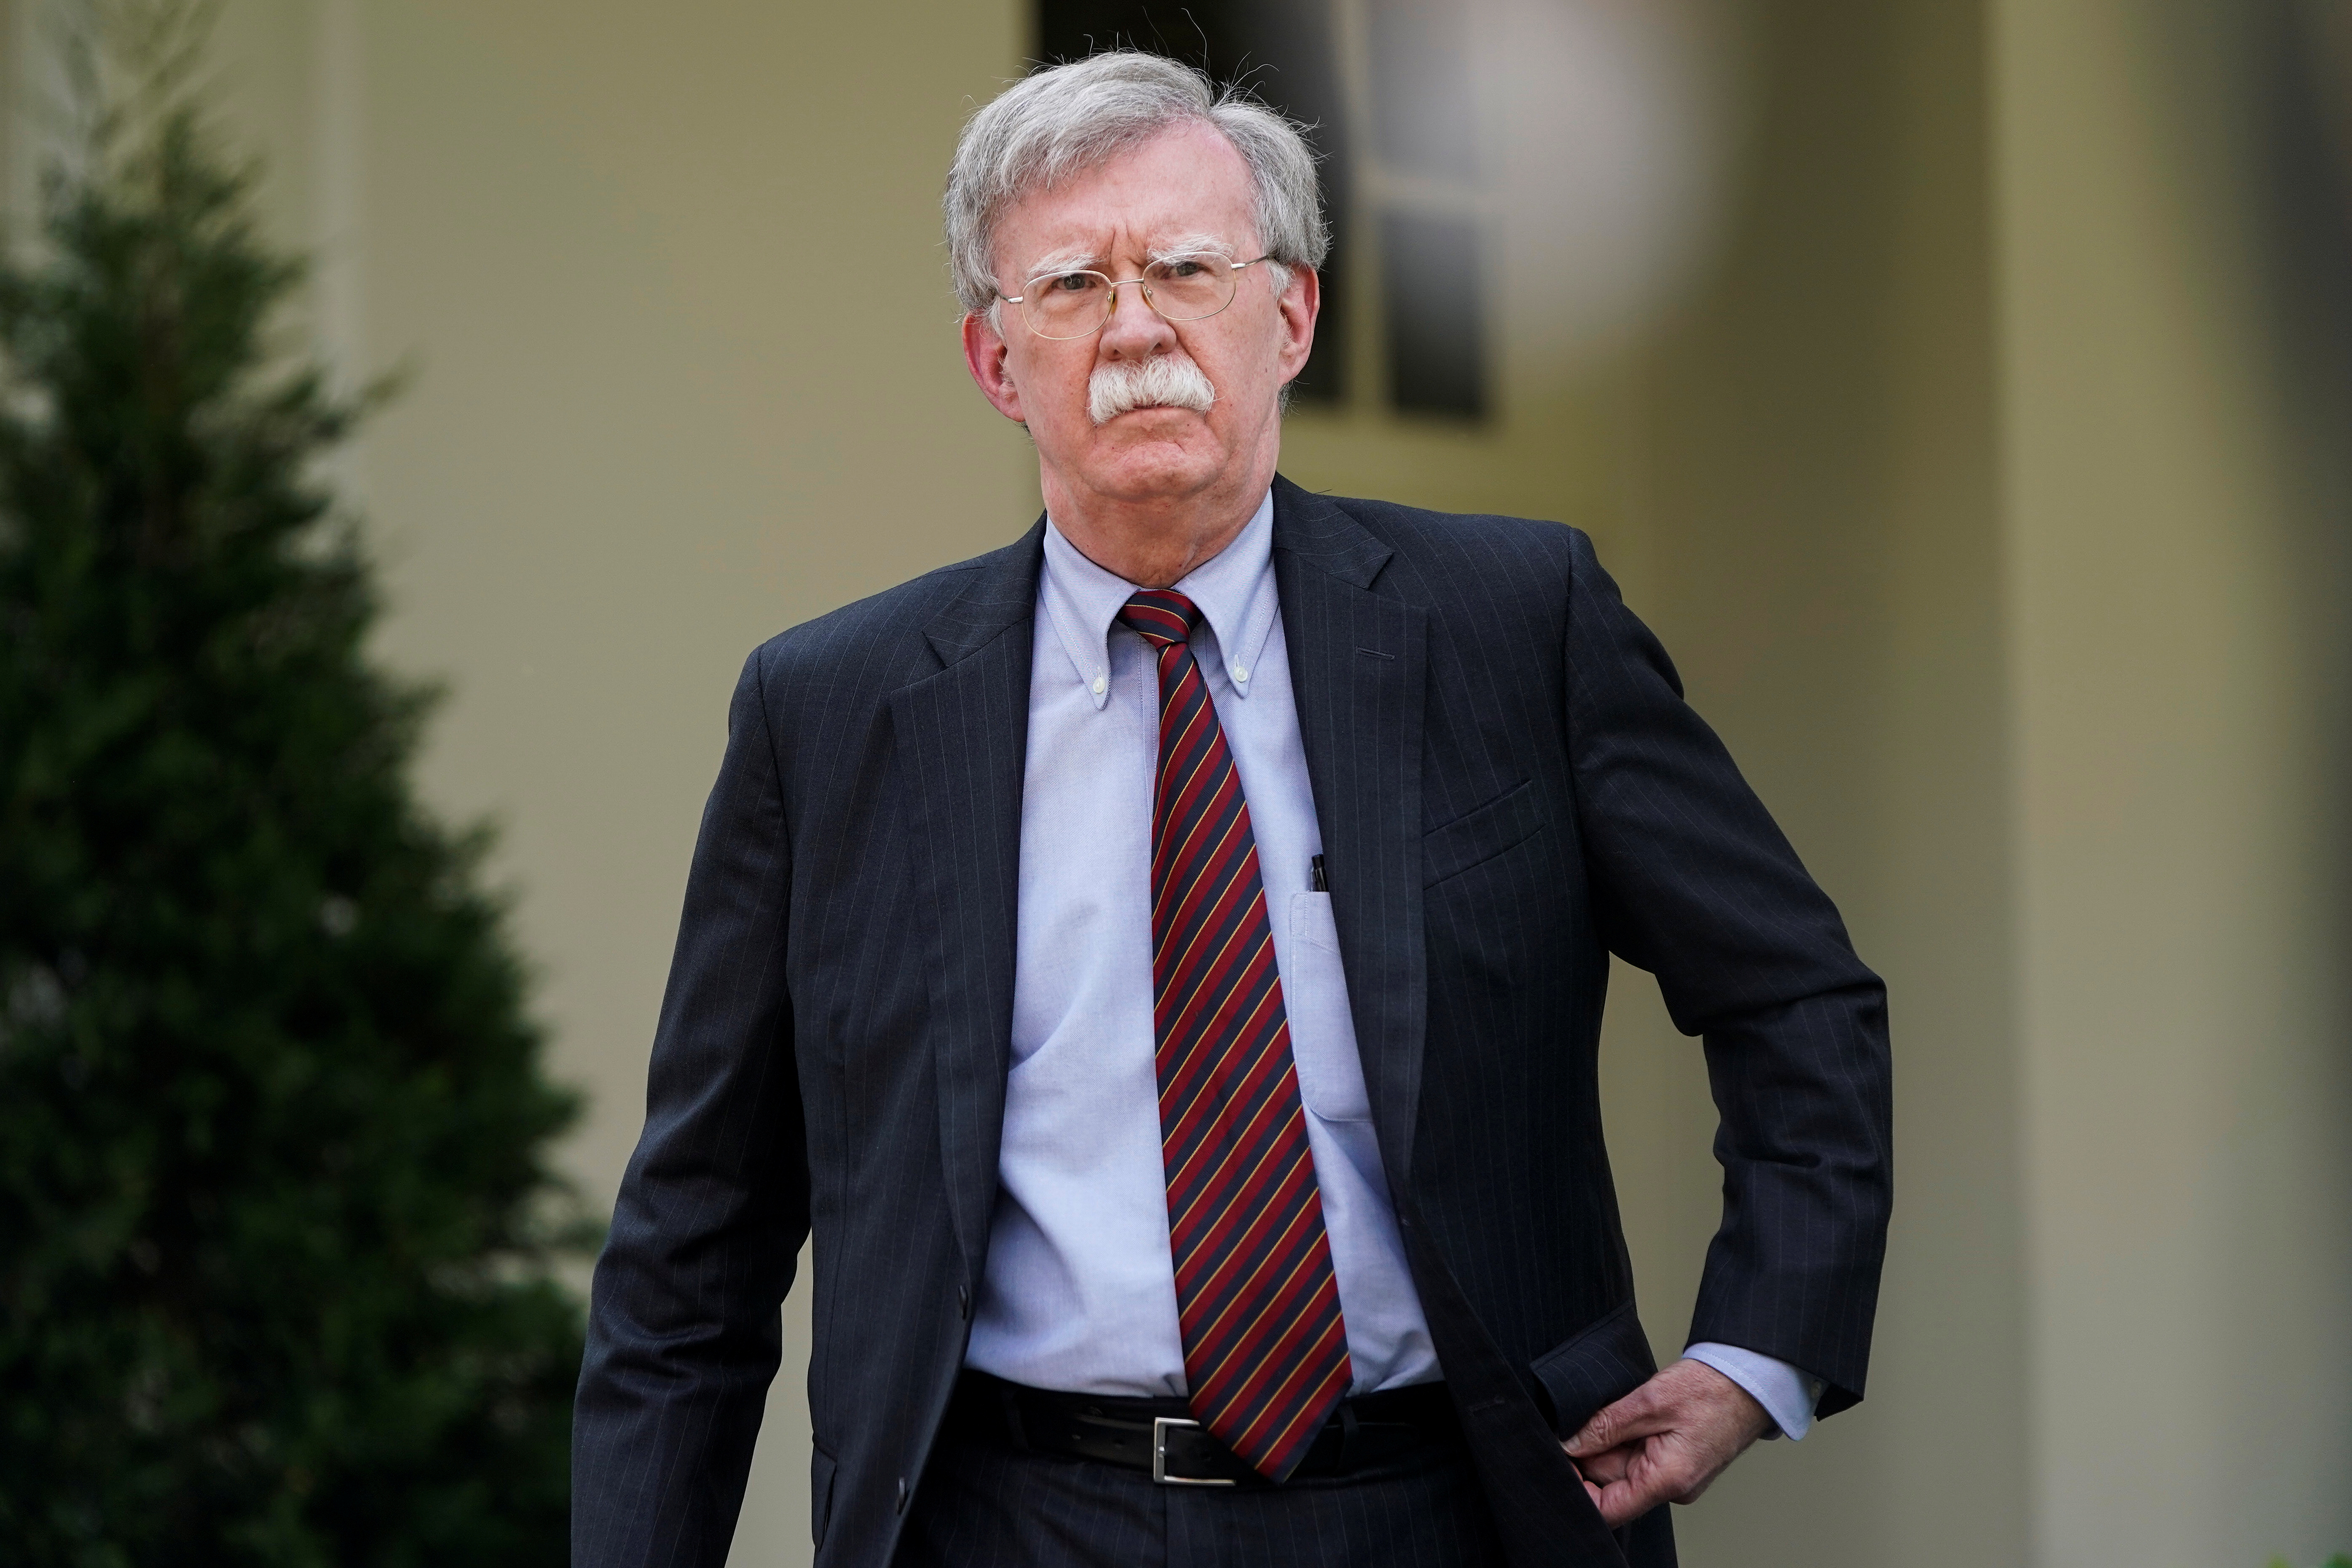 White House national security adviser Bolton arrives to speak about the political unrest in Venezuela, outside the White House in Washington